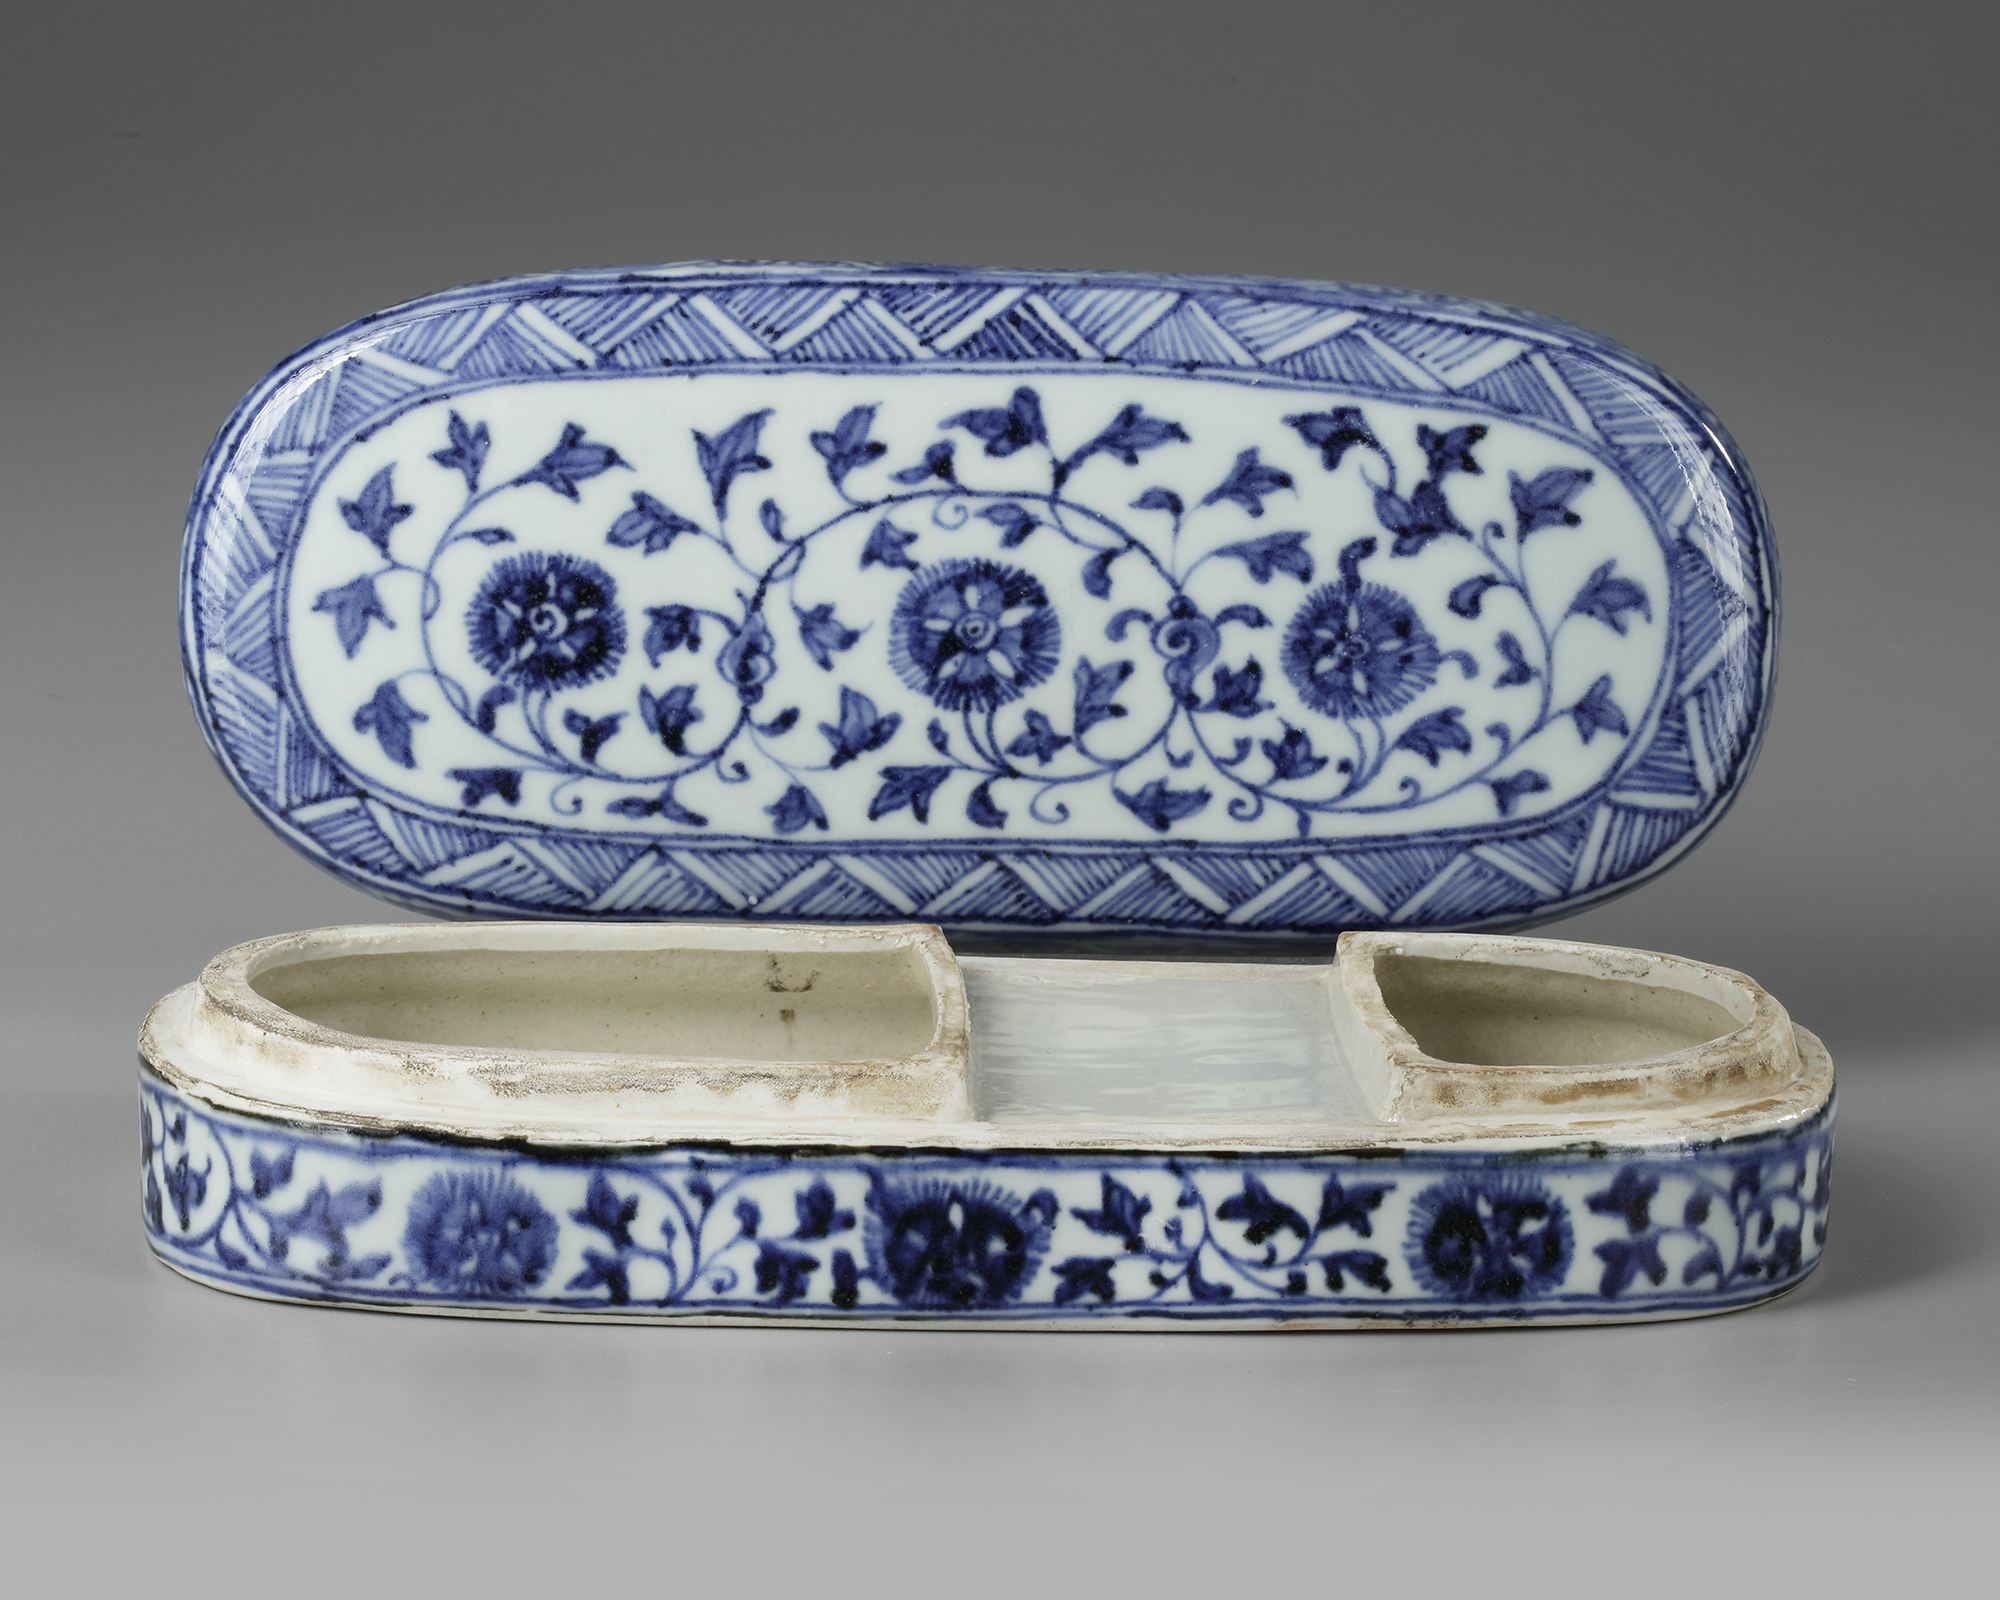 A CHINESE BLUE AND WHITE PEN BOX FOR THE ISLAMIC MARKET, QING DYNASTY (1644-1911) - Bild 3 aus 5